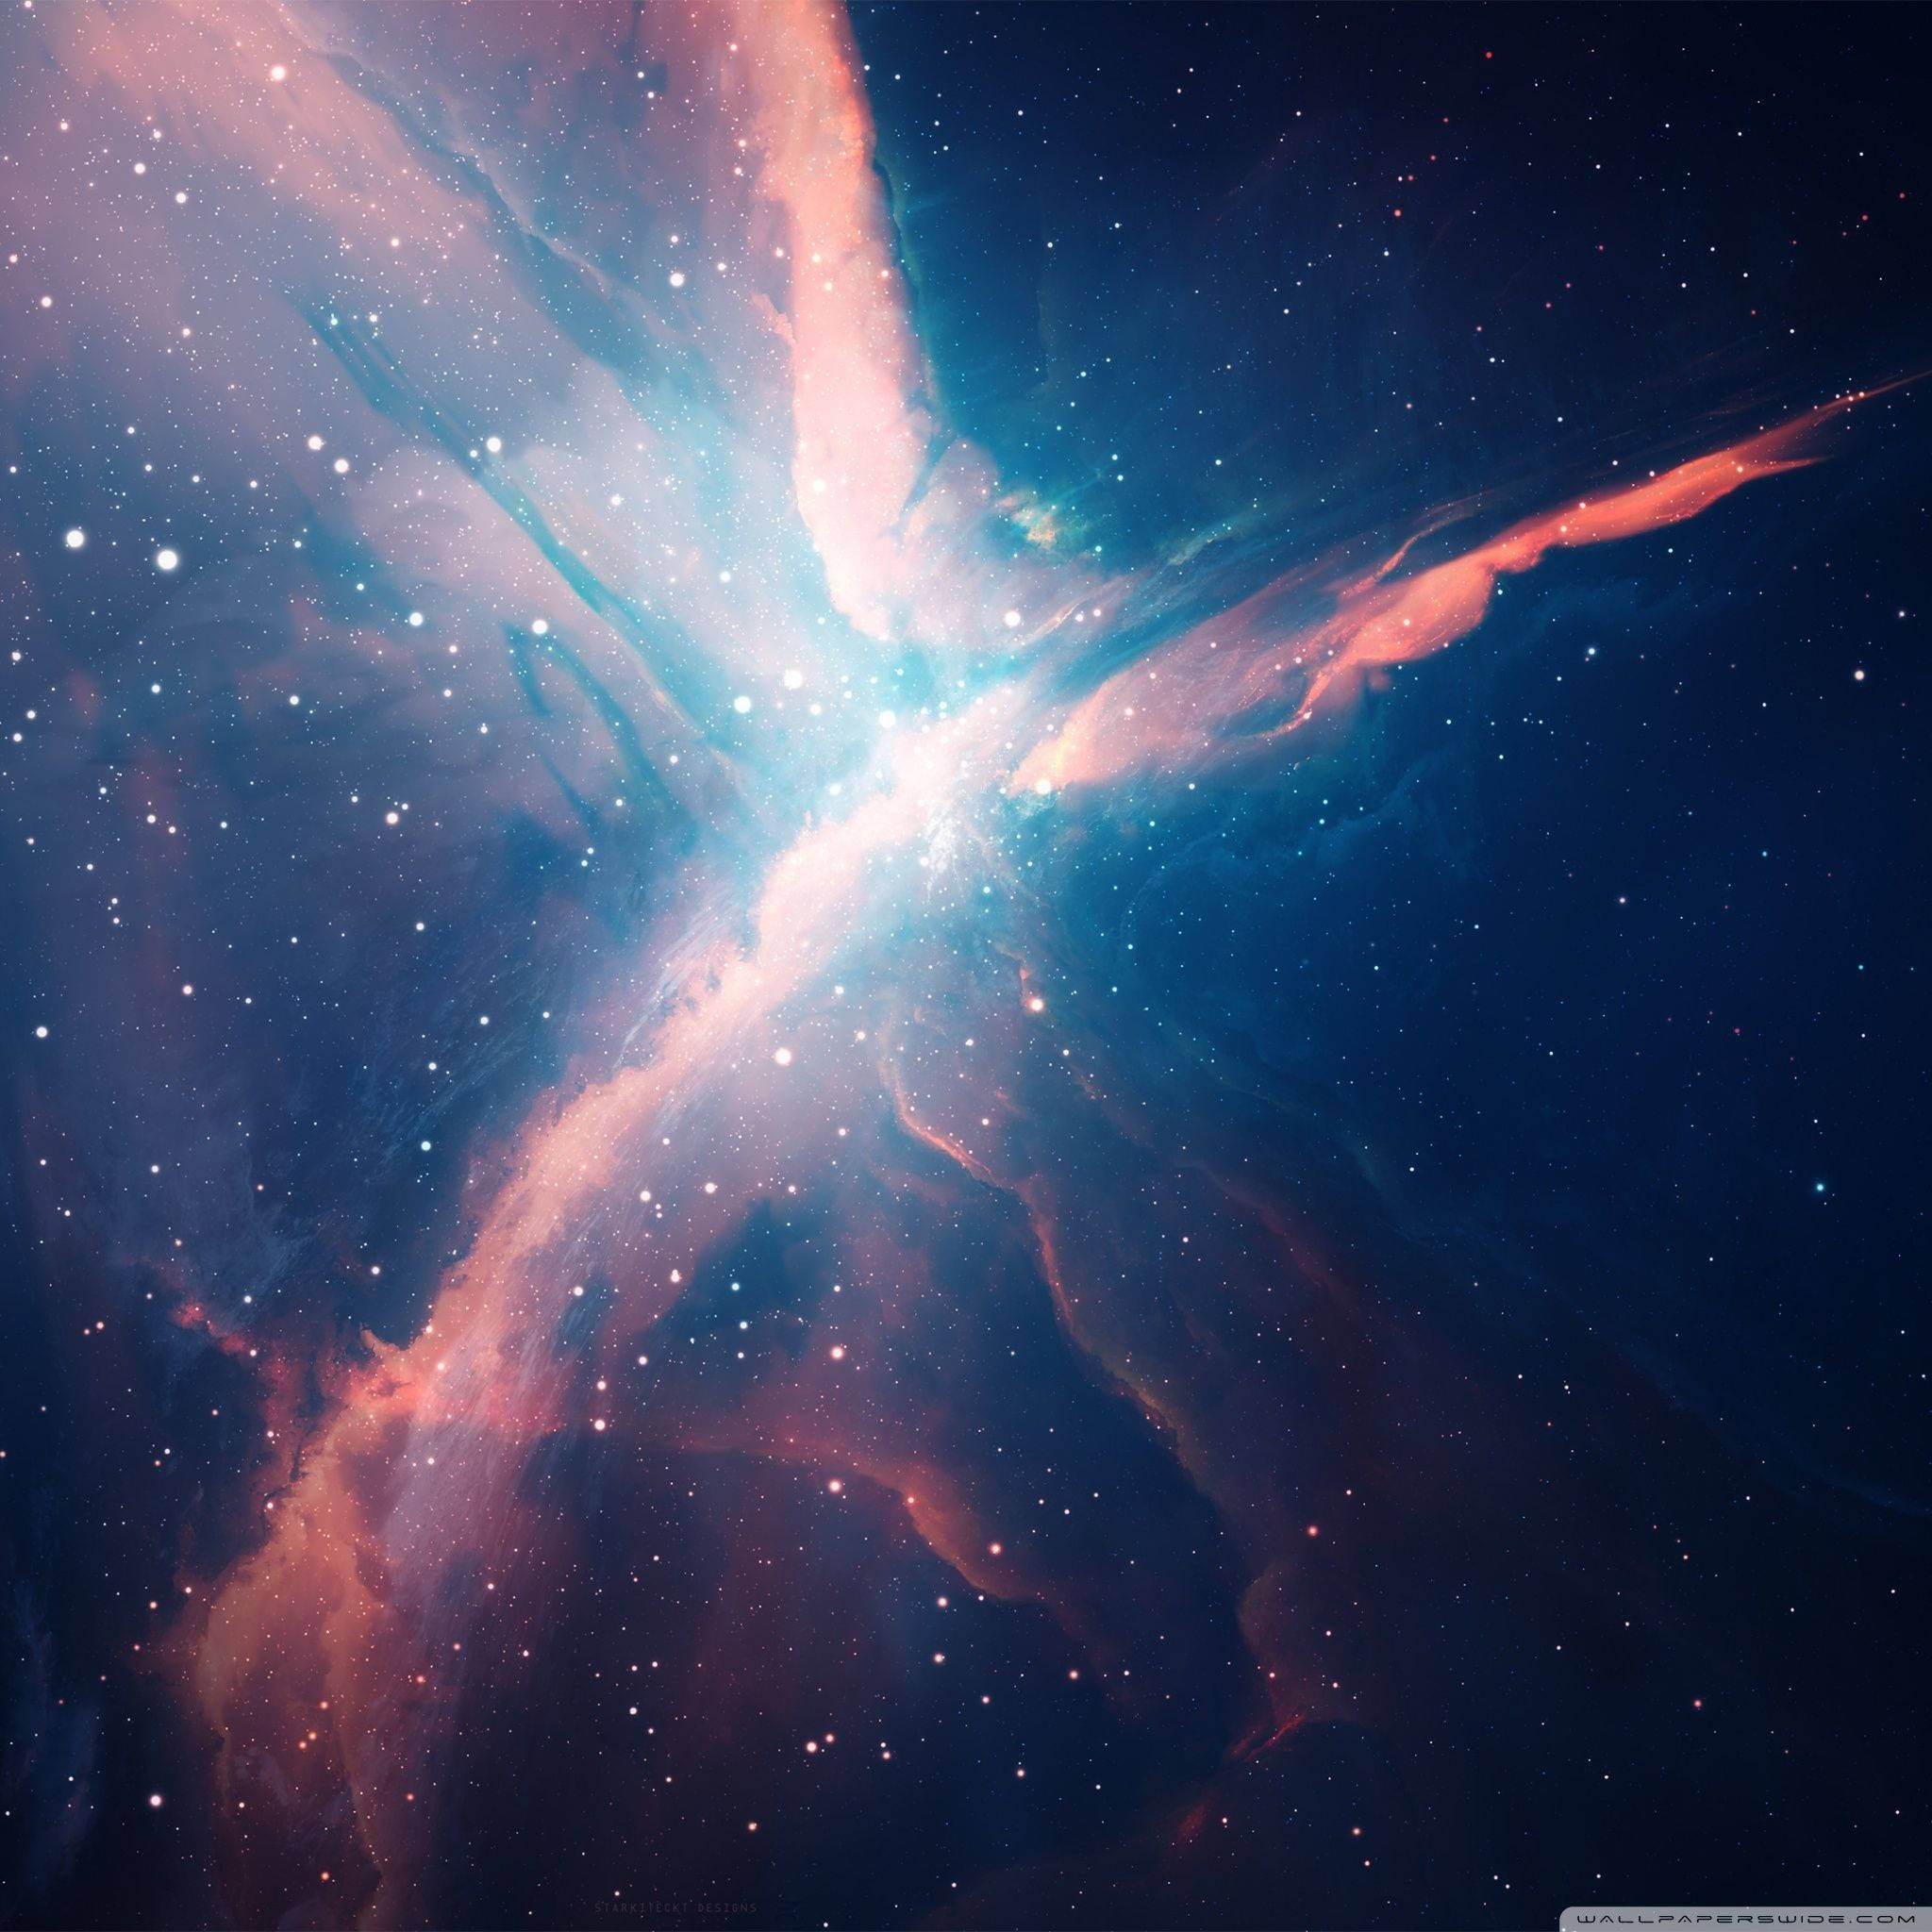 Glowing Galaxy As Official Ipad Theme Background